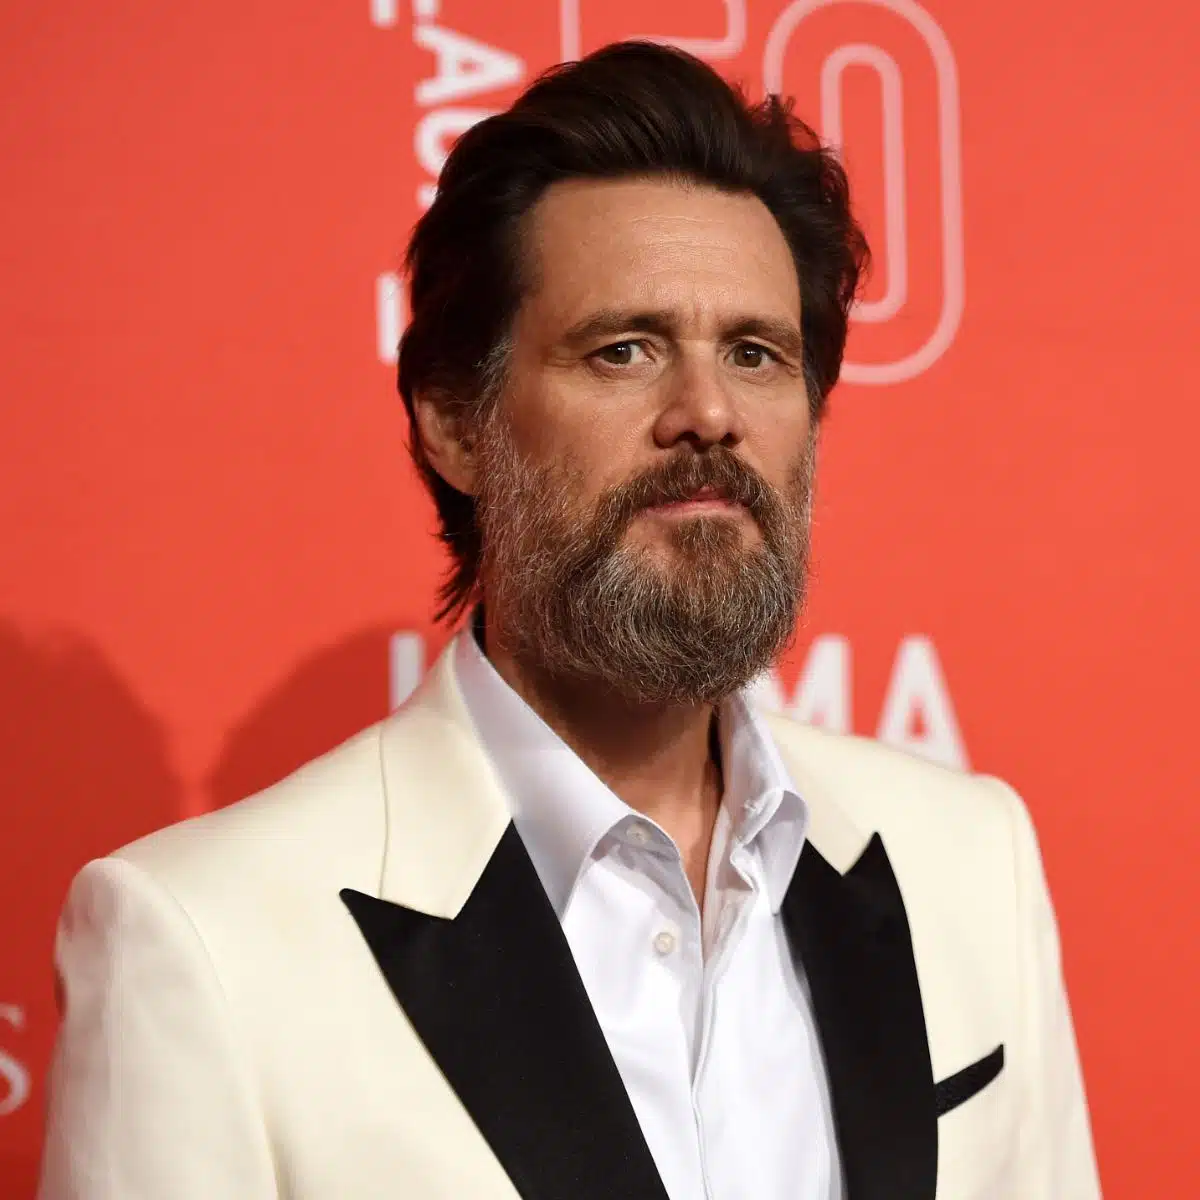 Why was Jim Carrey escorted out of the Golden Globes